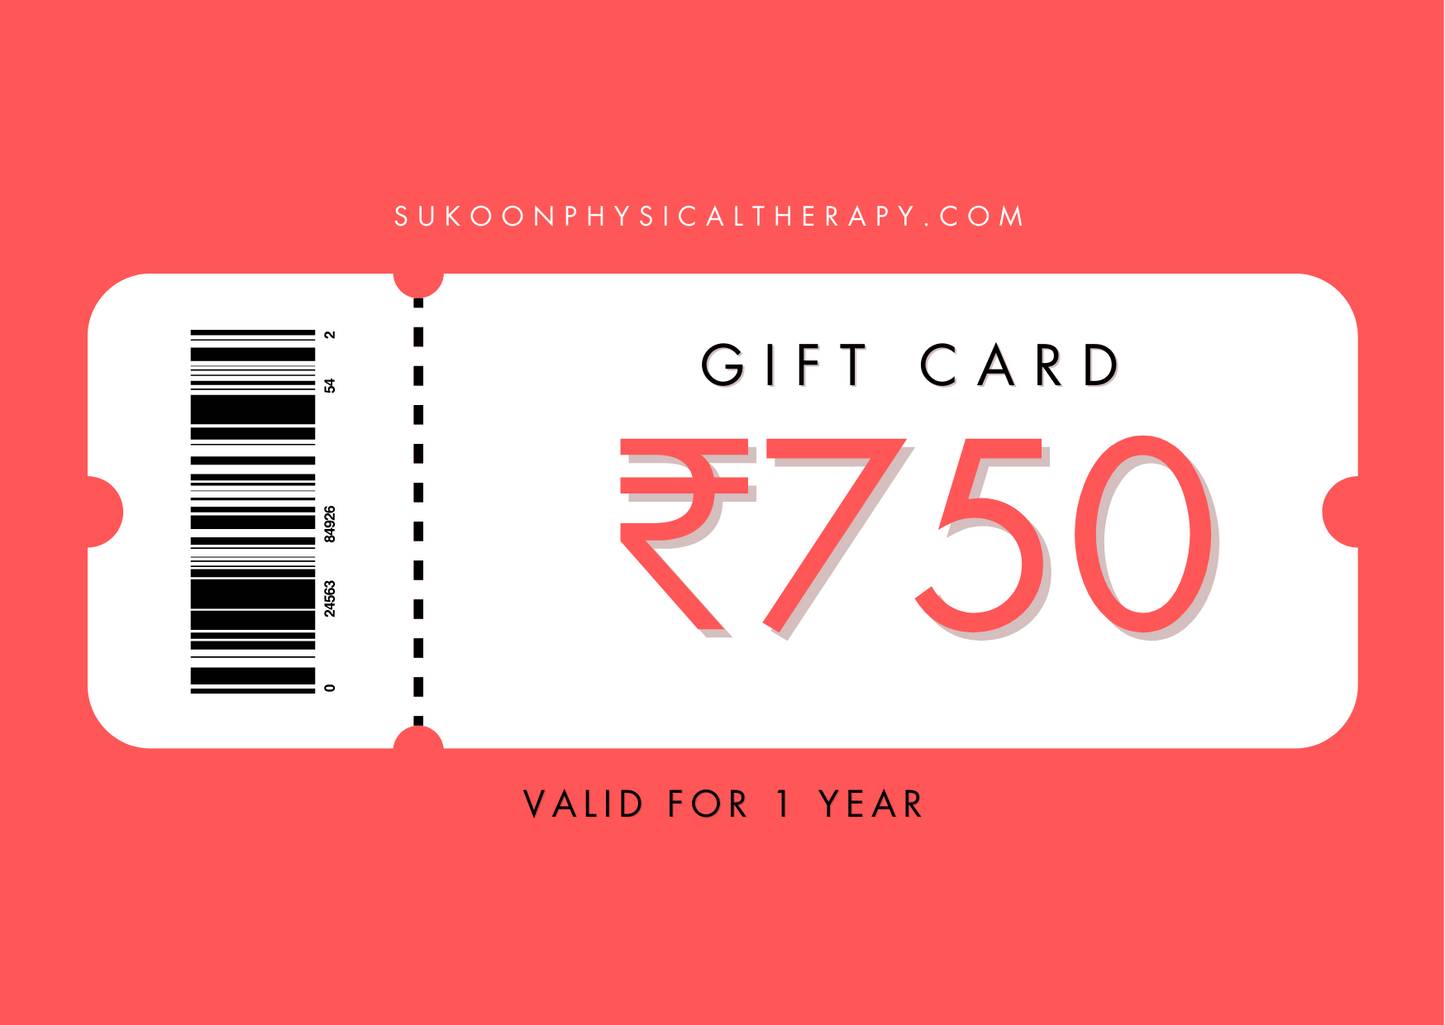 The Sukoon Physical Therapy Giftcard